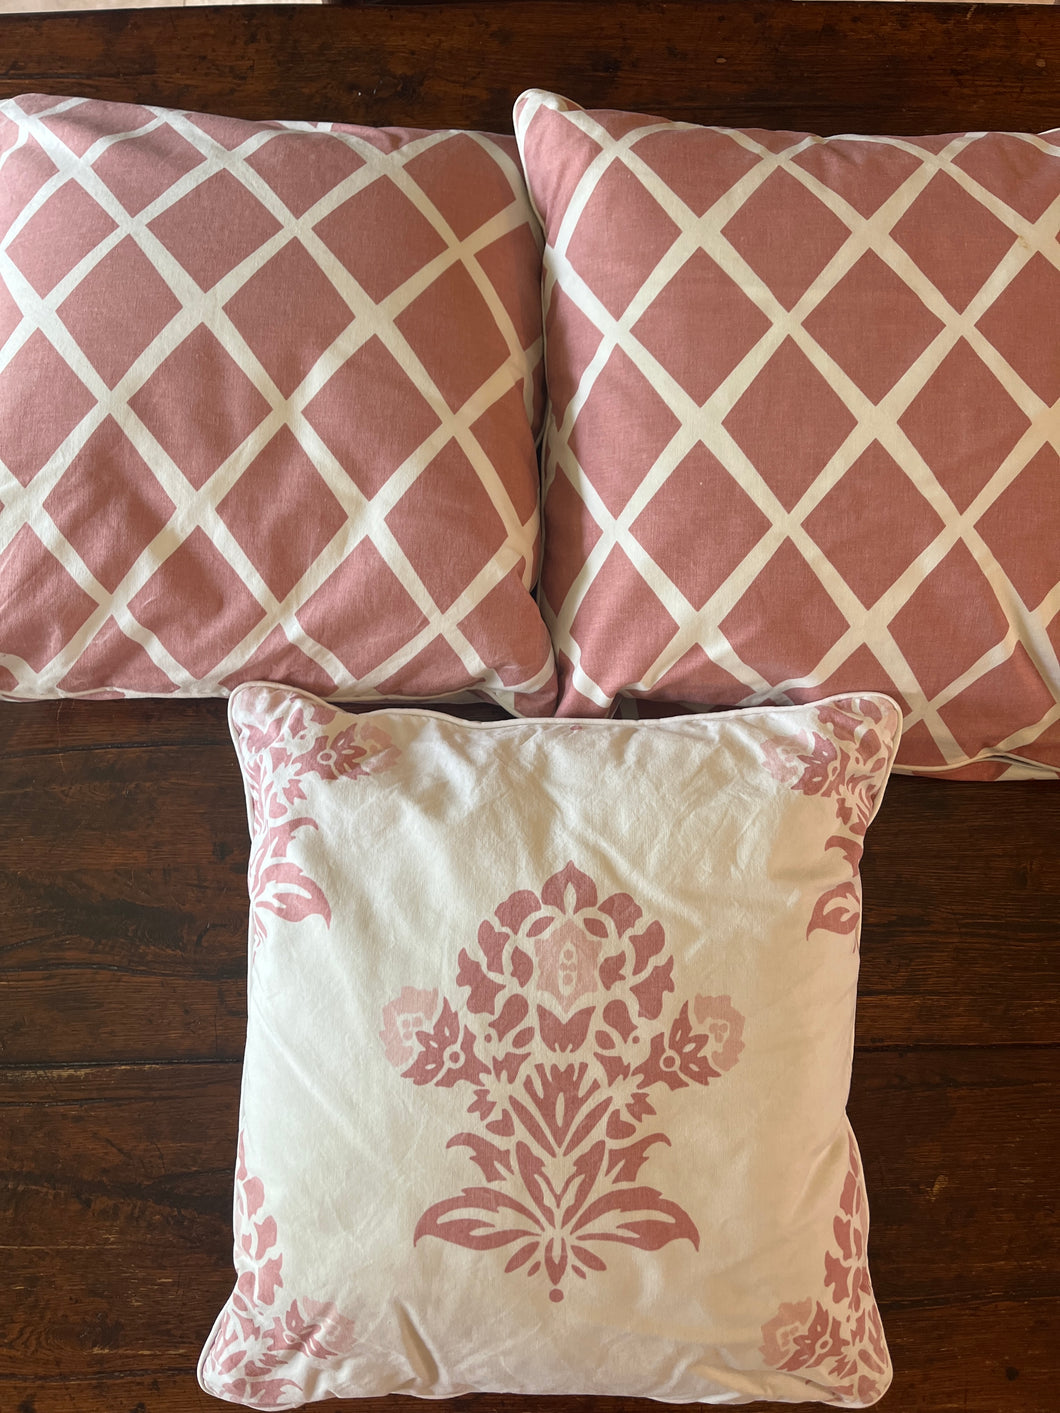 Serena and Lily 3 pillows